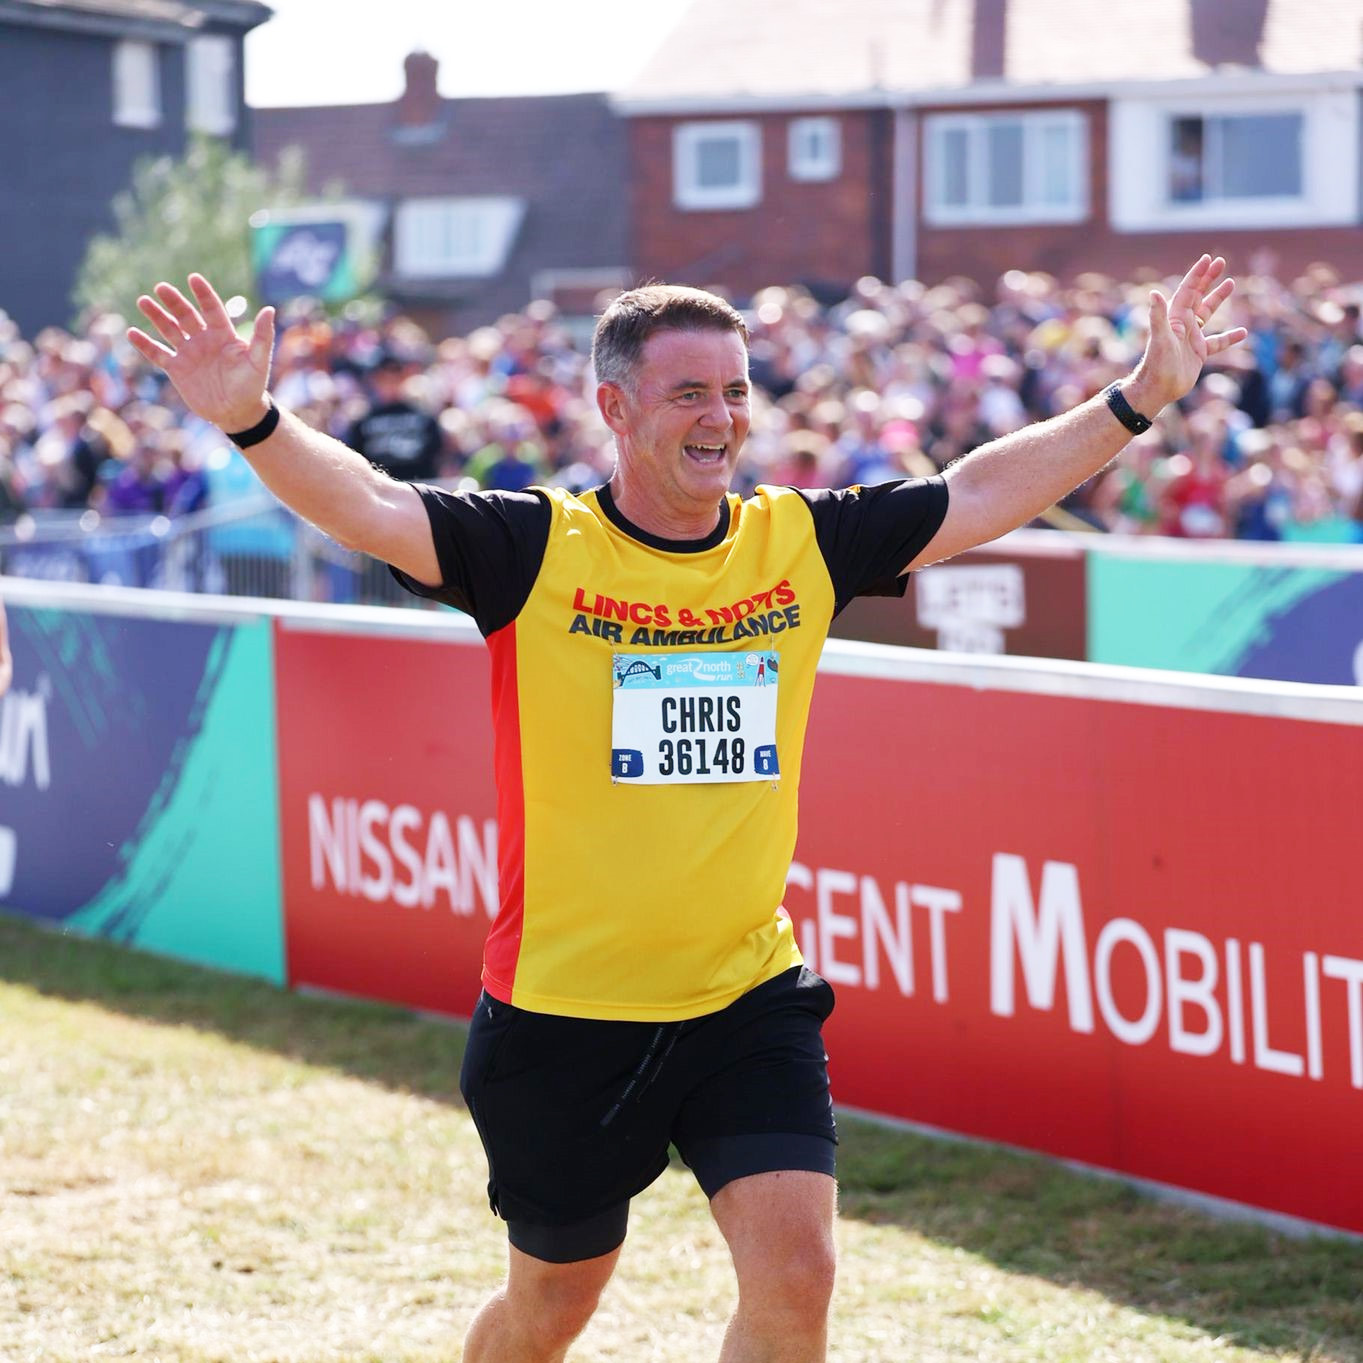 Fundraiser completing the Great North Run